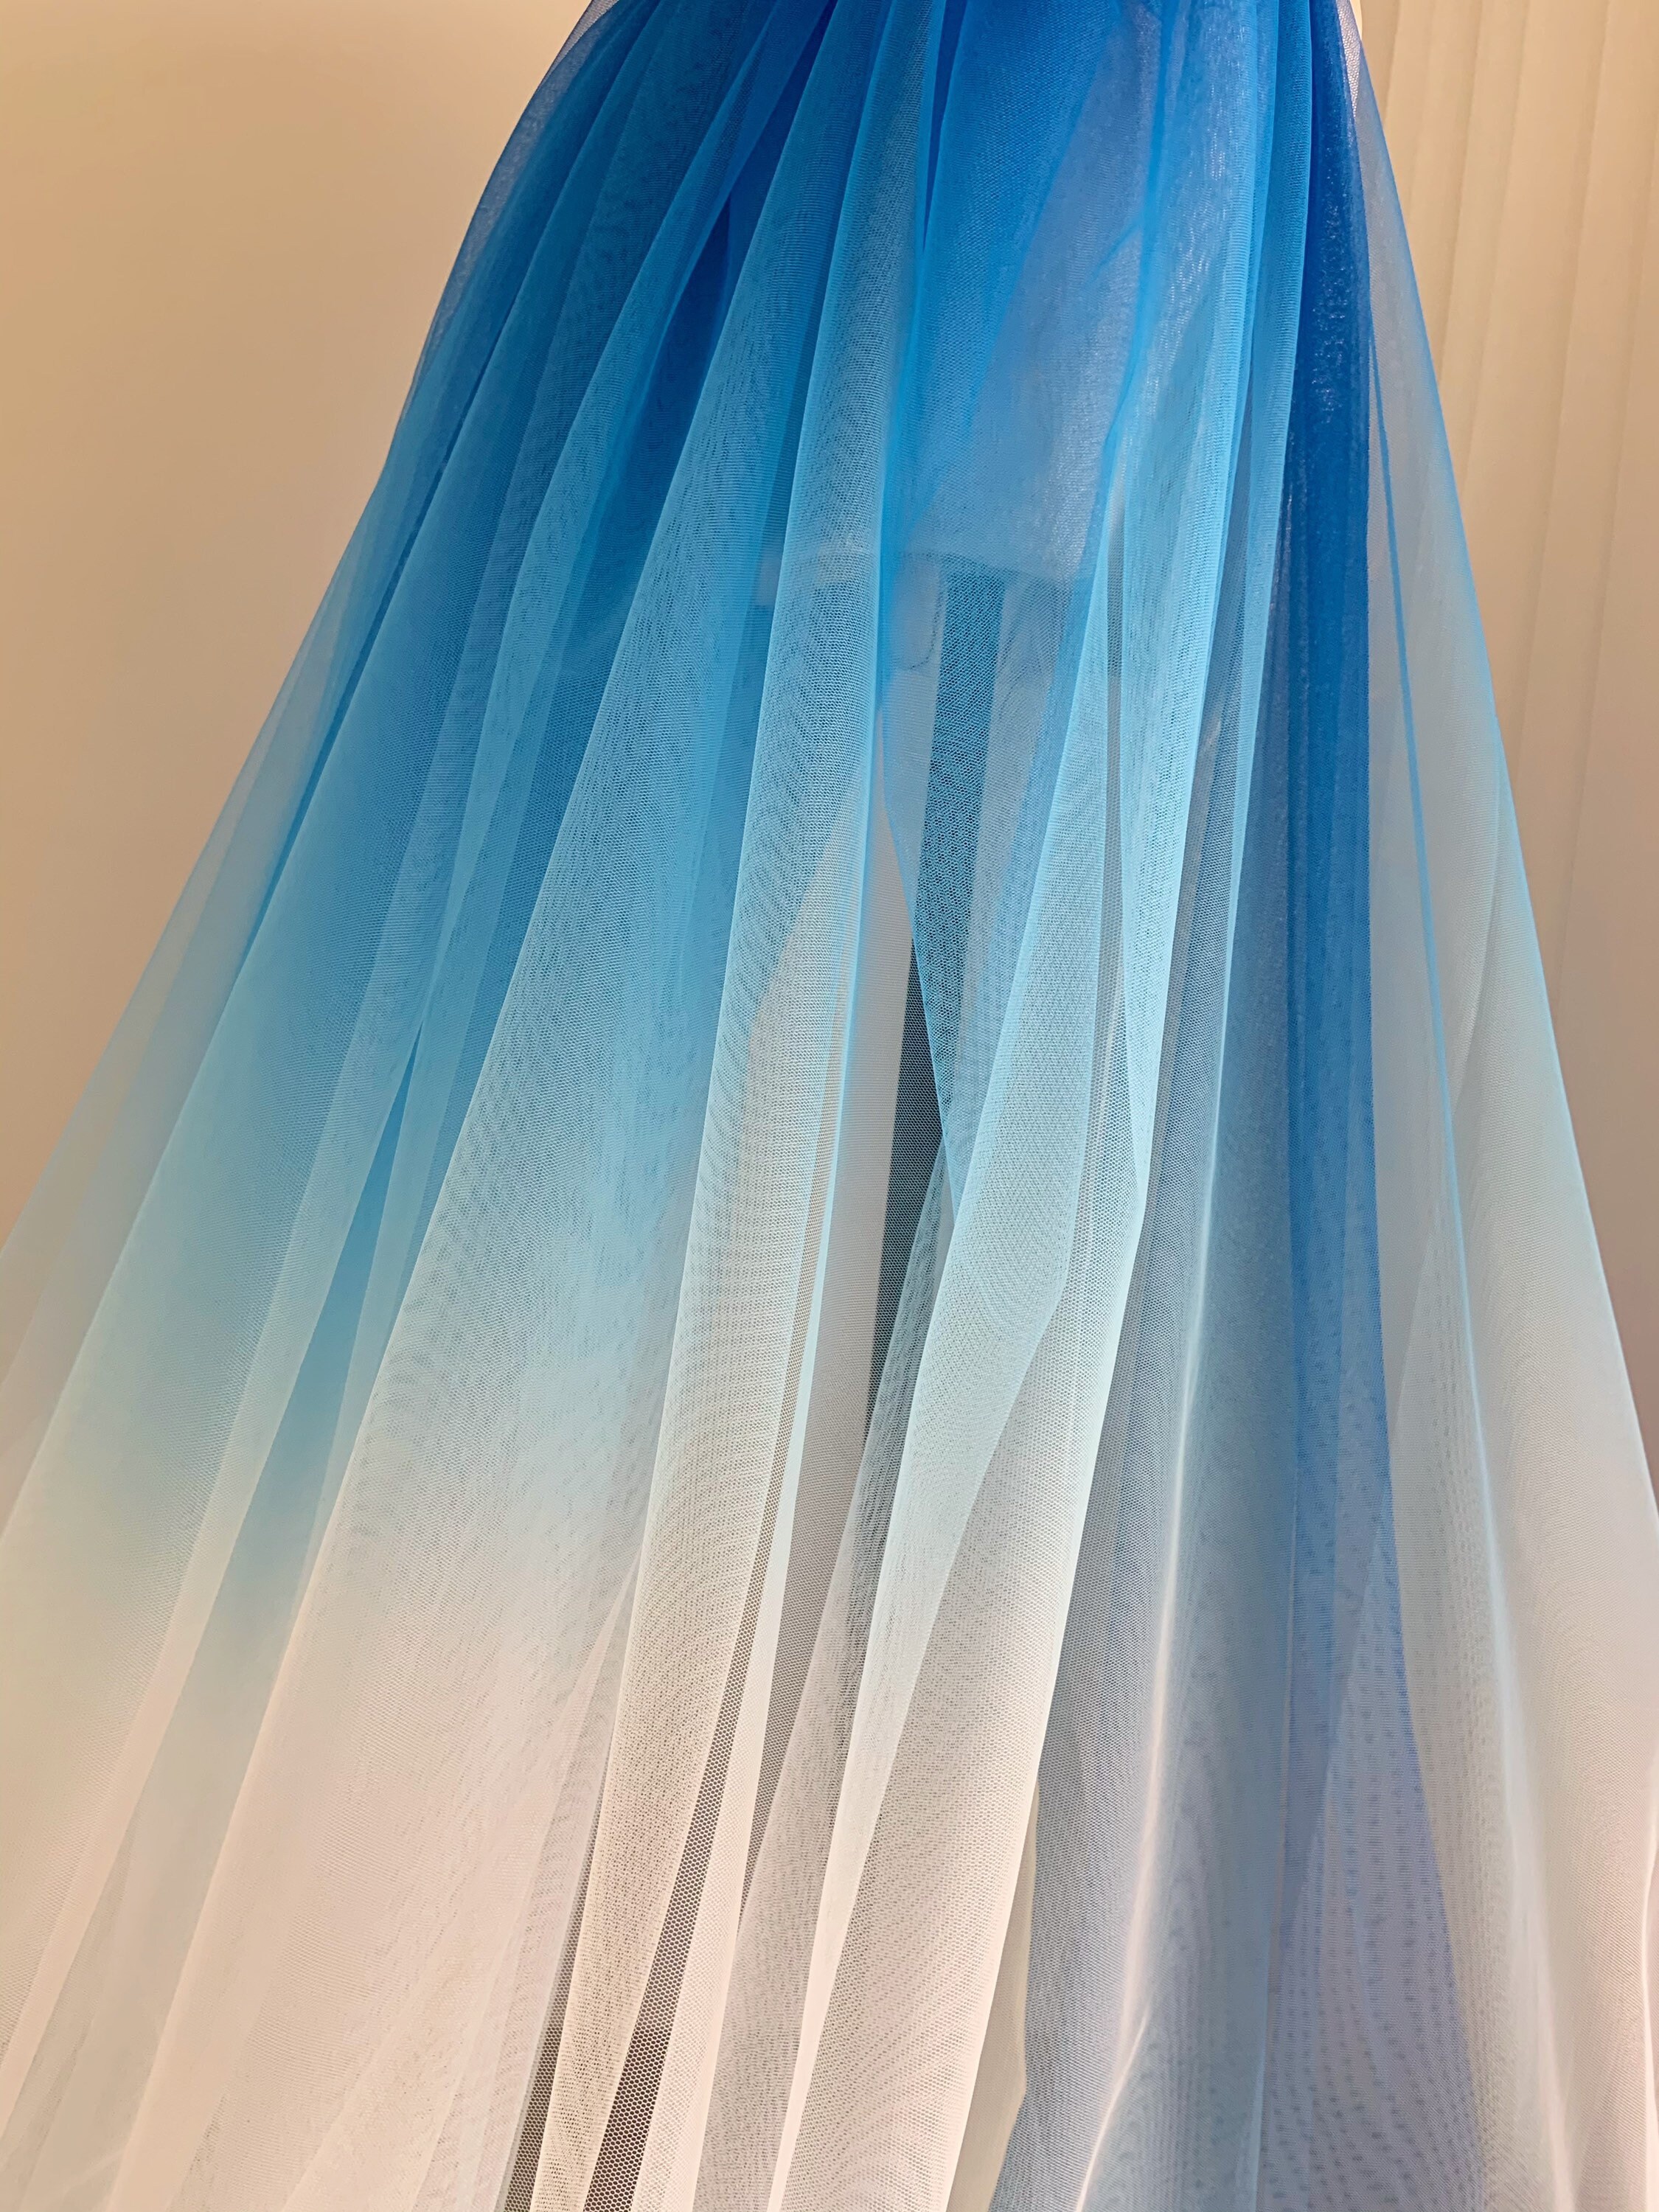 Dip Dye Style Tulle Fabric With Ombré Colors Blue and White - Etsy UK